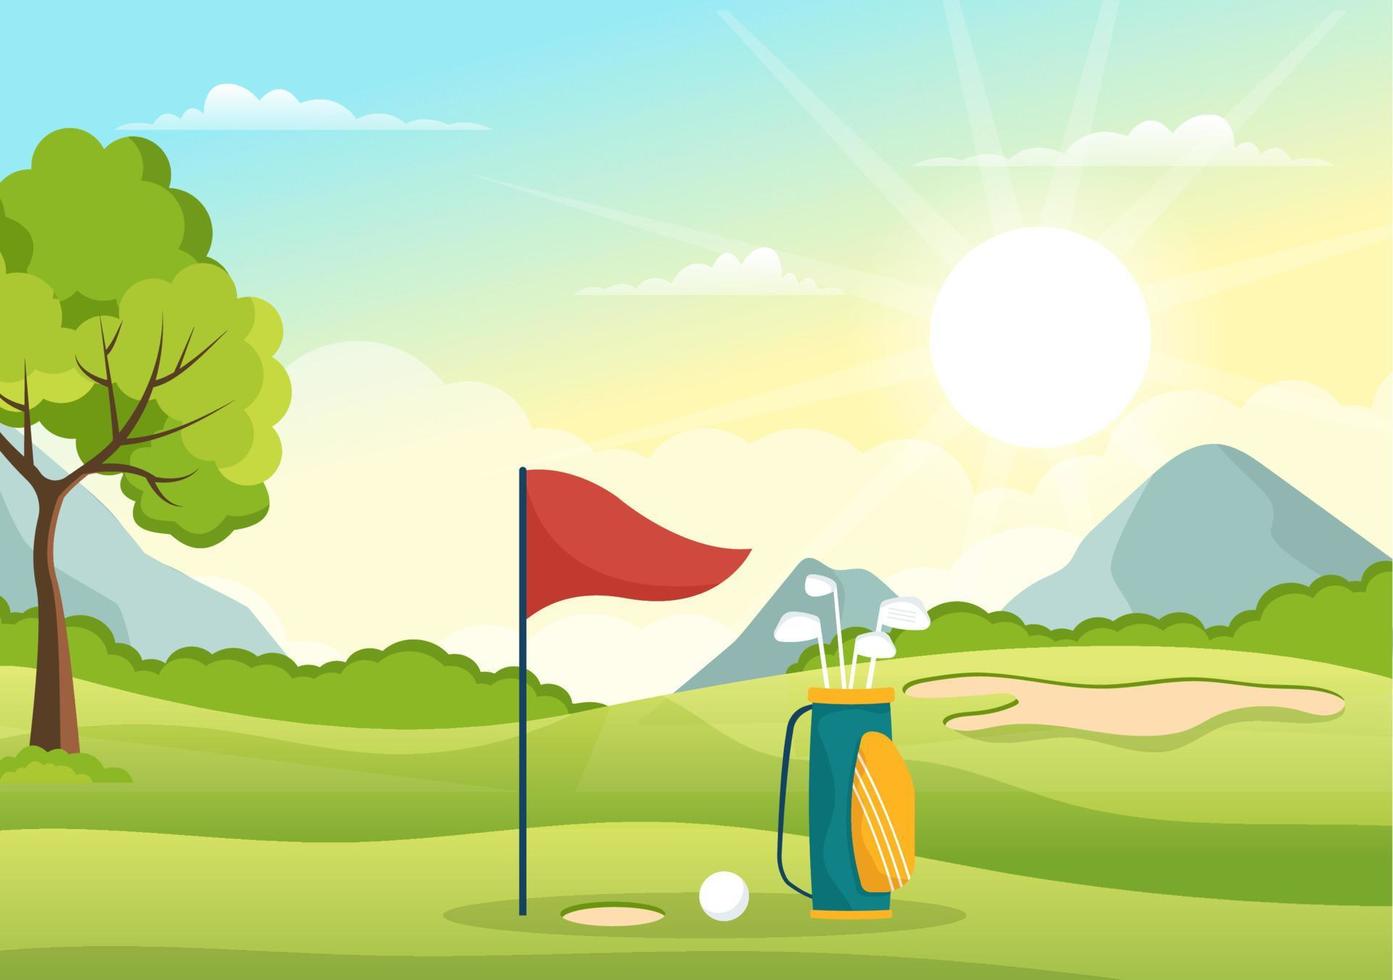 Golf Sport Illustration with Flags, Cart, Sticks, Green Field and Sand Bunker for Outdoors Fun or Lifestyle in Flat Cartoon Hand Drawn Templates vector